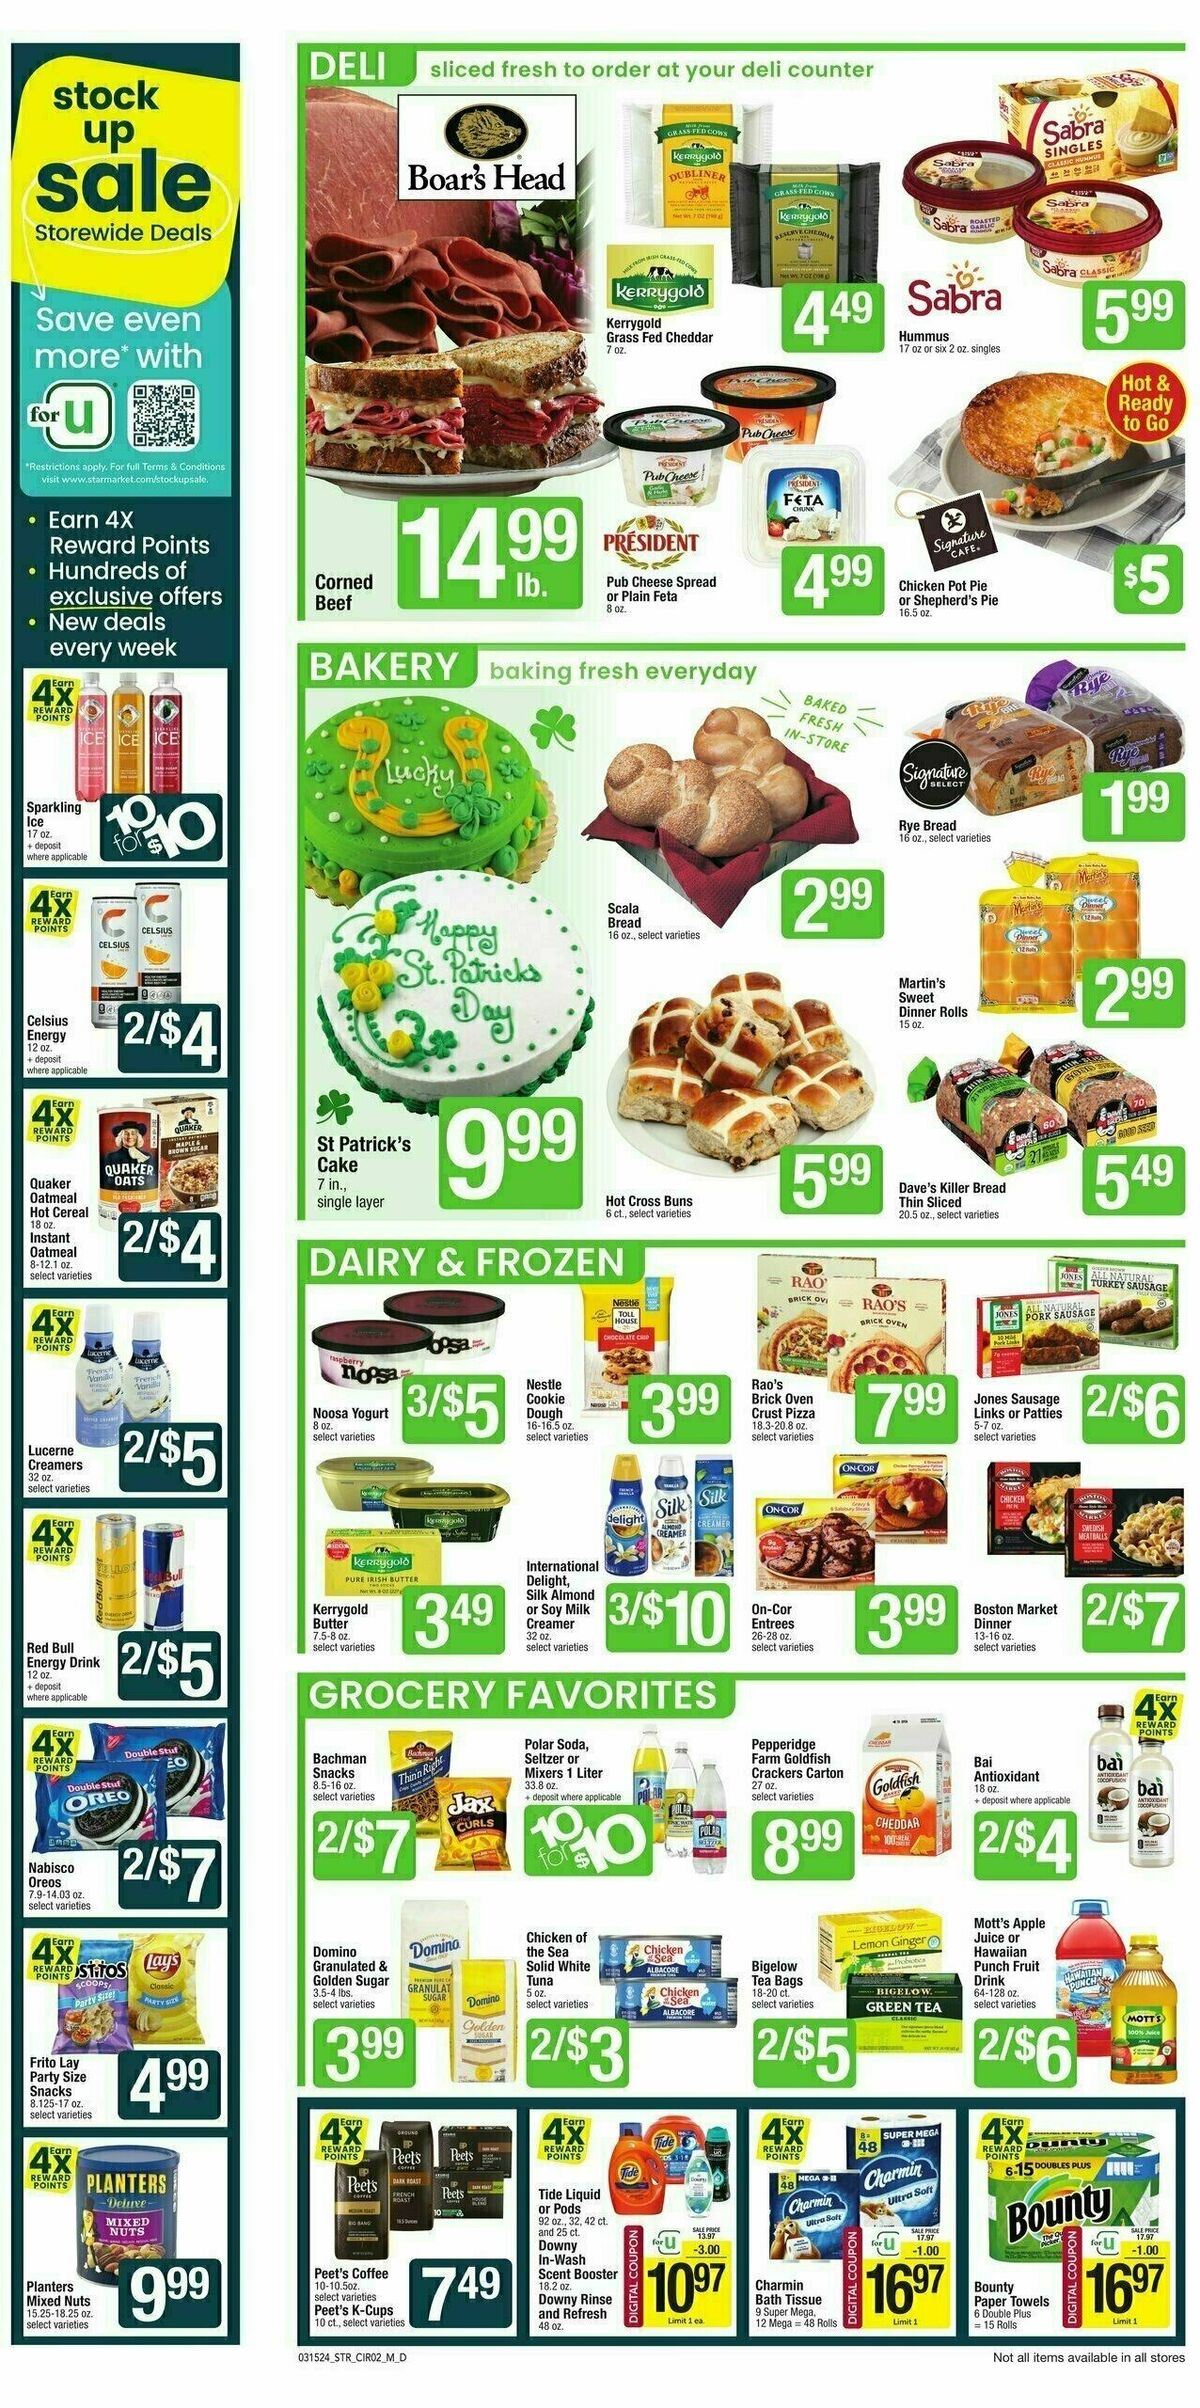 Star Market Weekly Ad from March 15